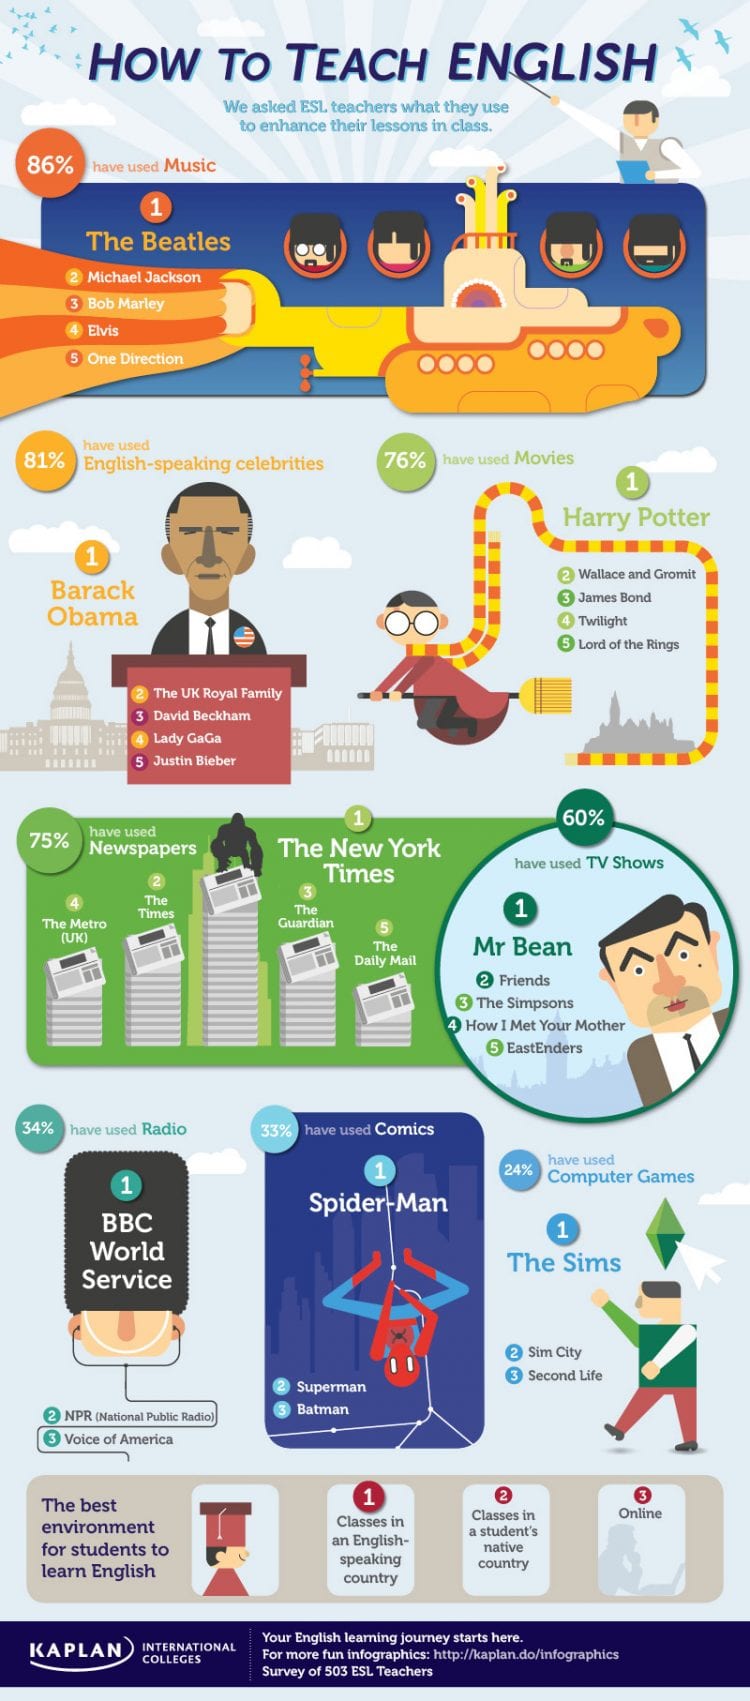 How To Teach English? Tools for English Teachers to Be Creative [Infographic]